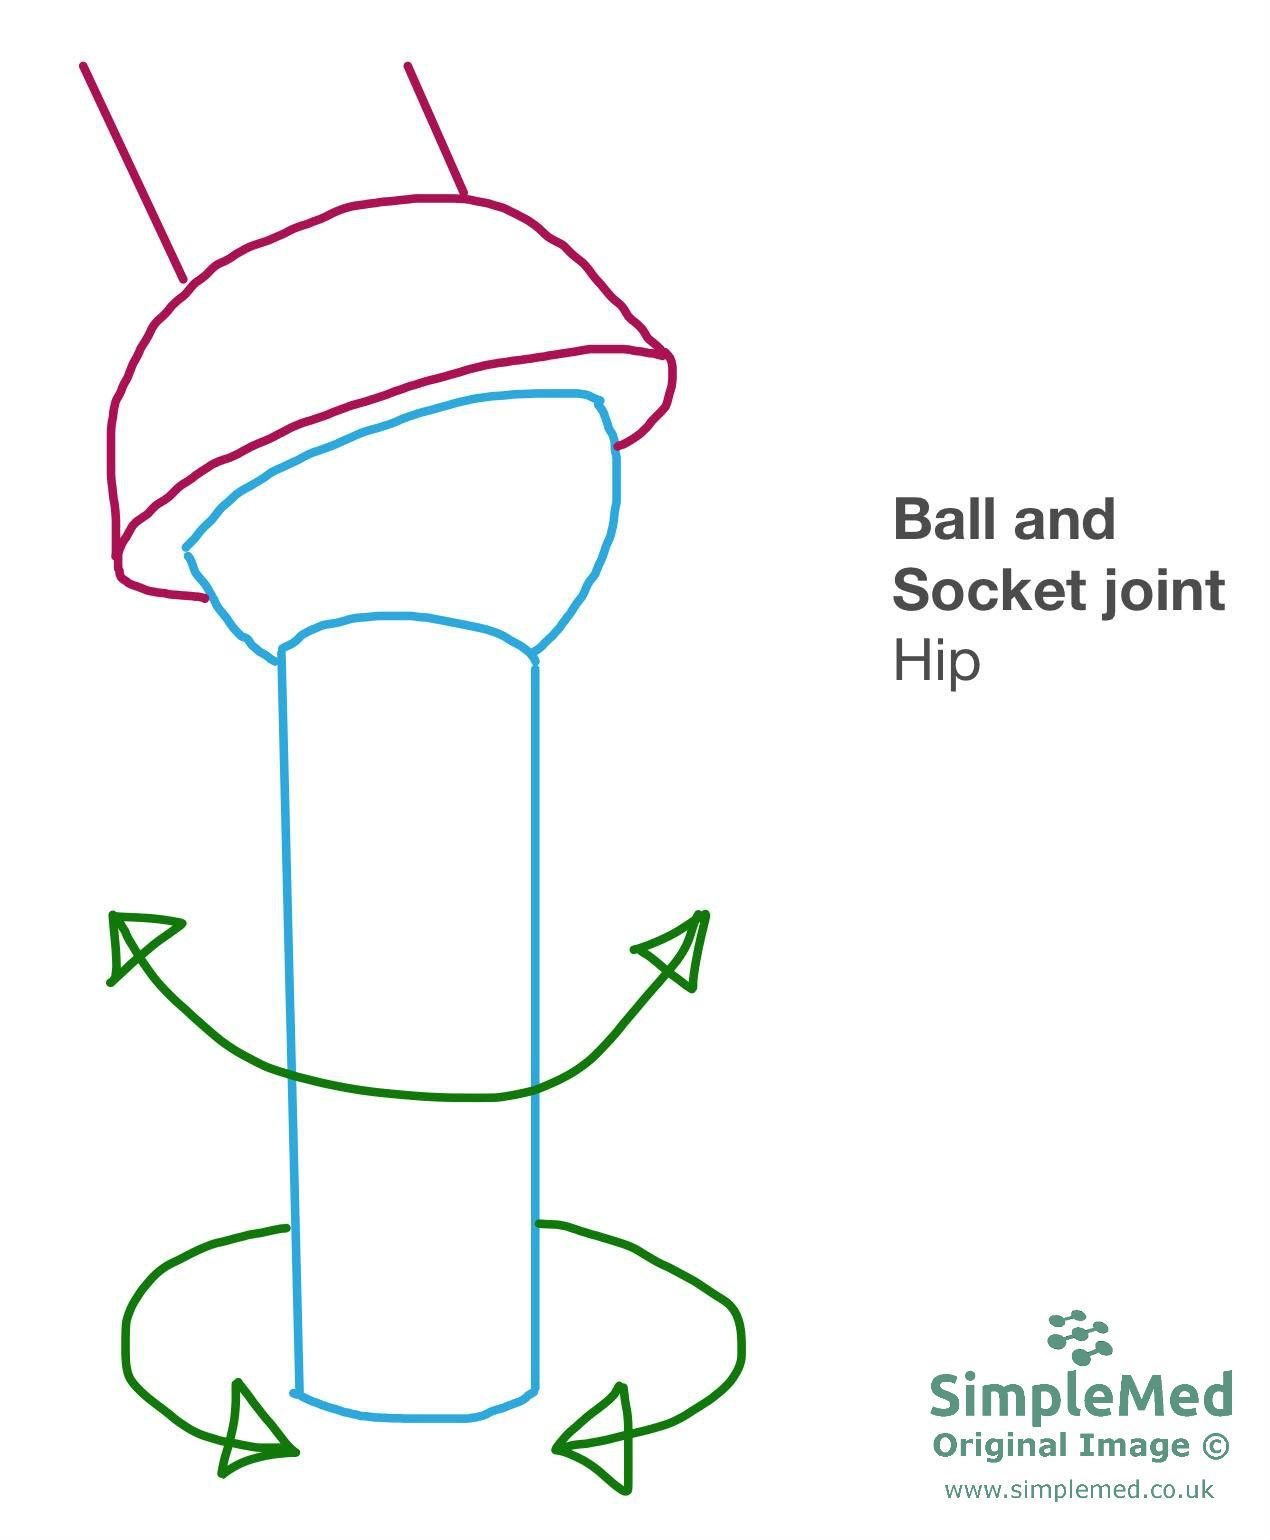 Ball and Socket Joint SimpleMed